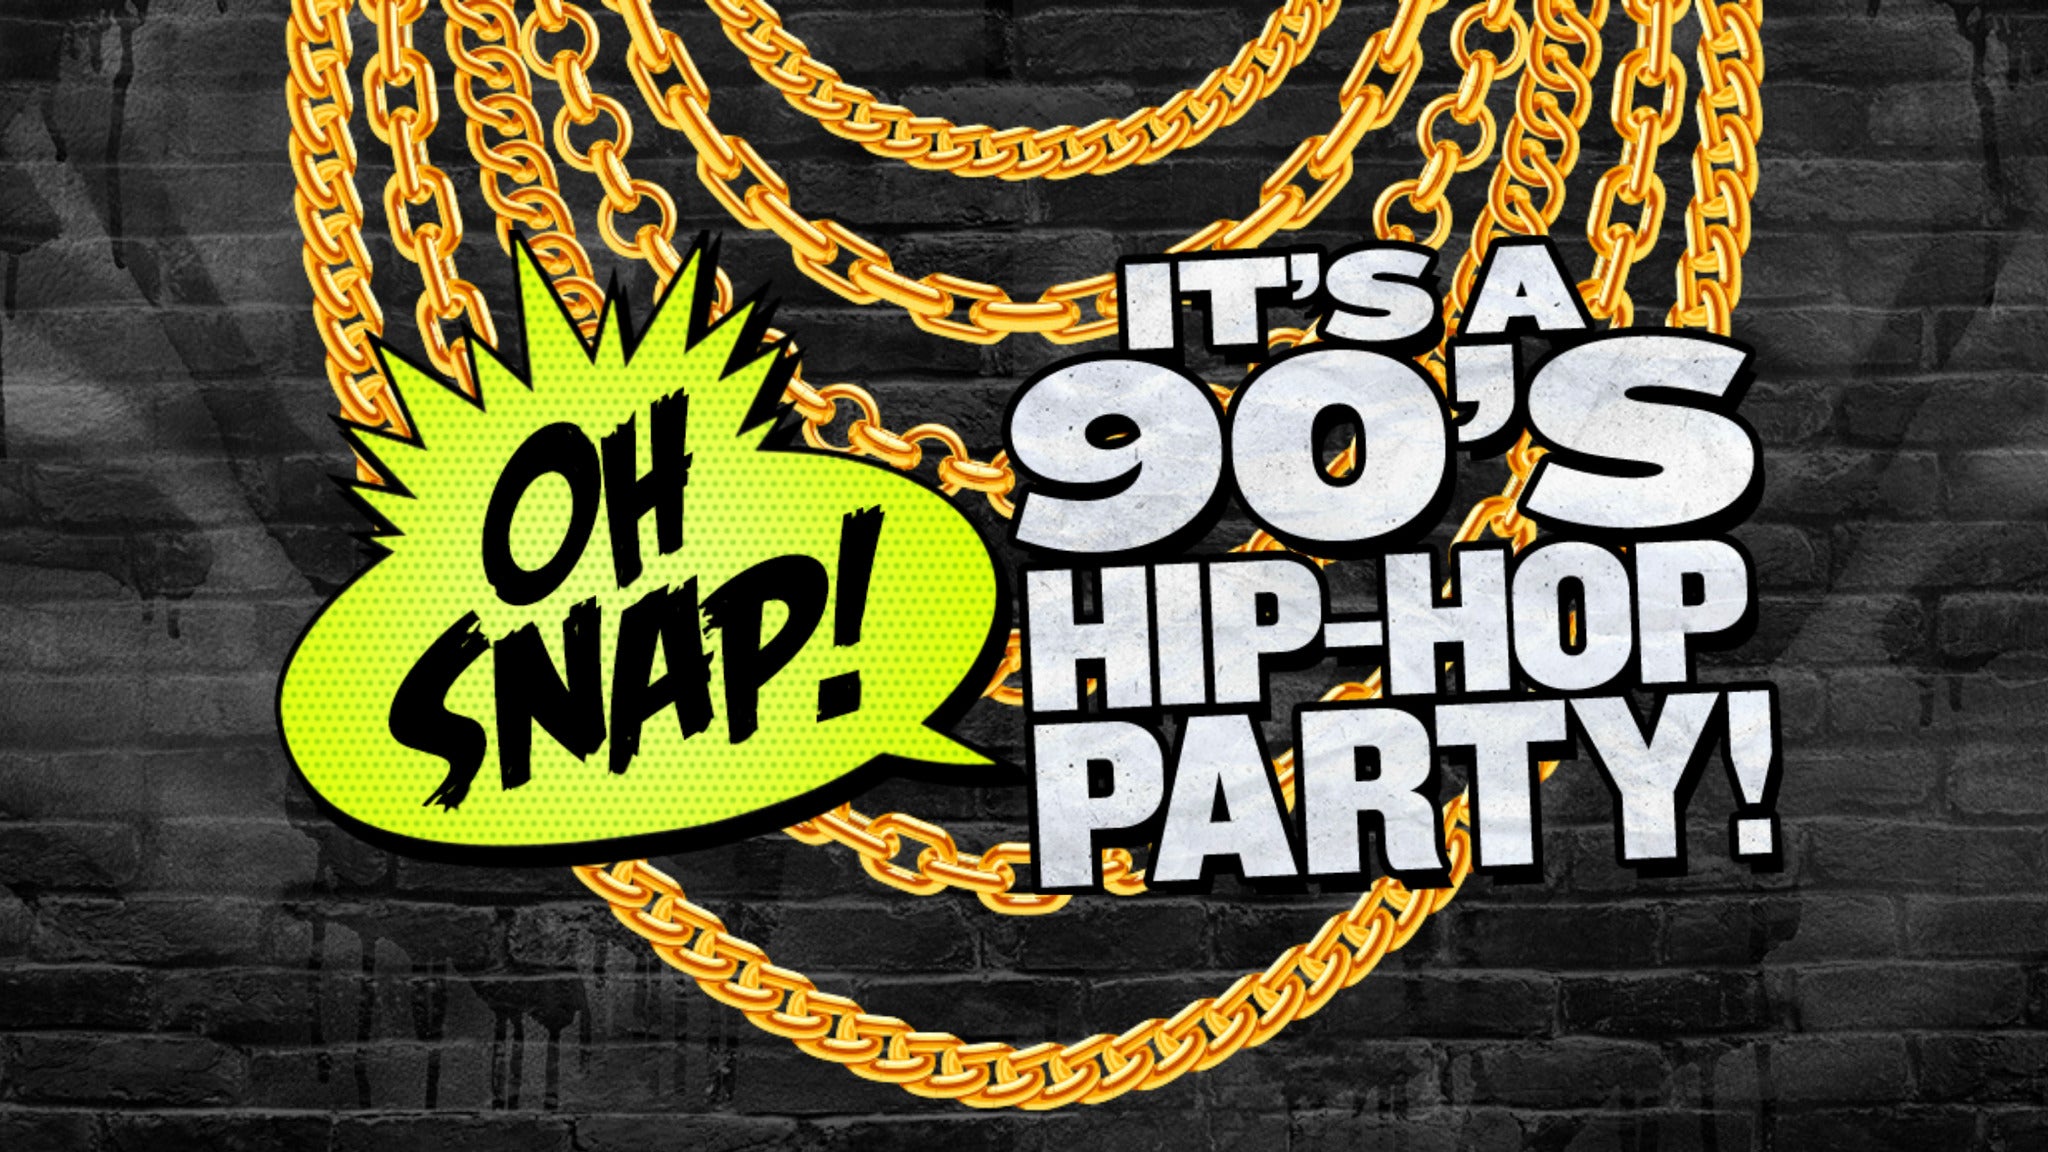 OH SNAP! 90's vs 00's Party (21+ w/ ID) presale password for show tickets in San Diego, CA (House of Blues San Diego)